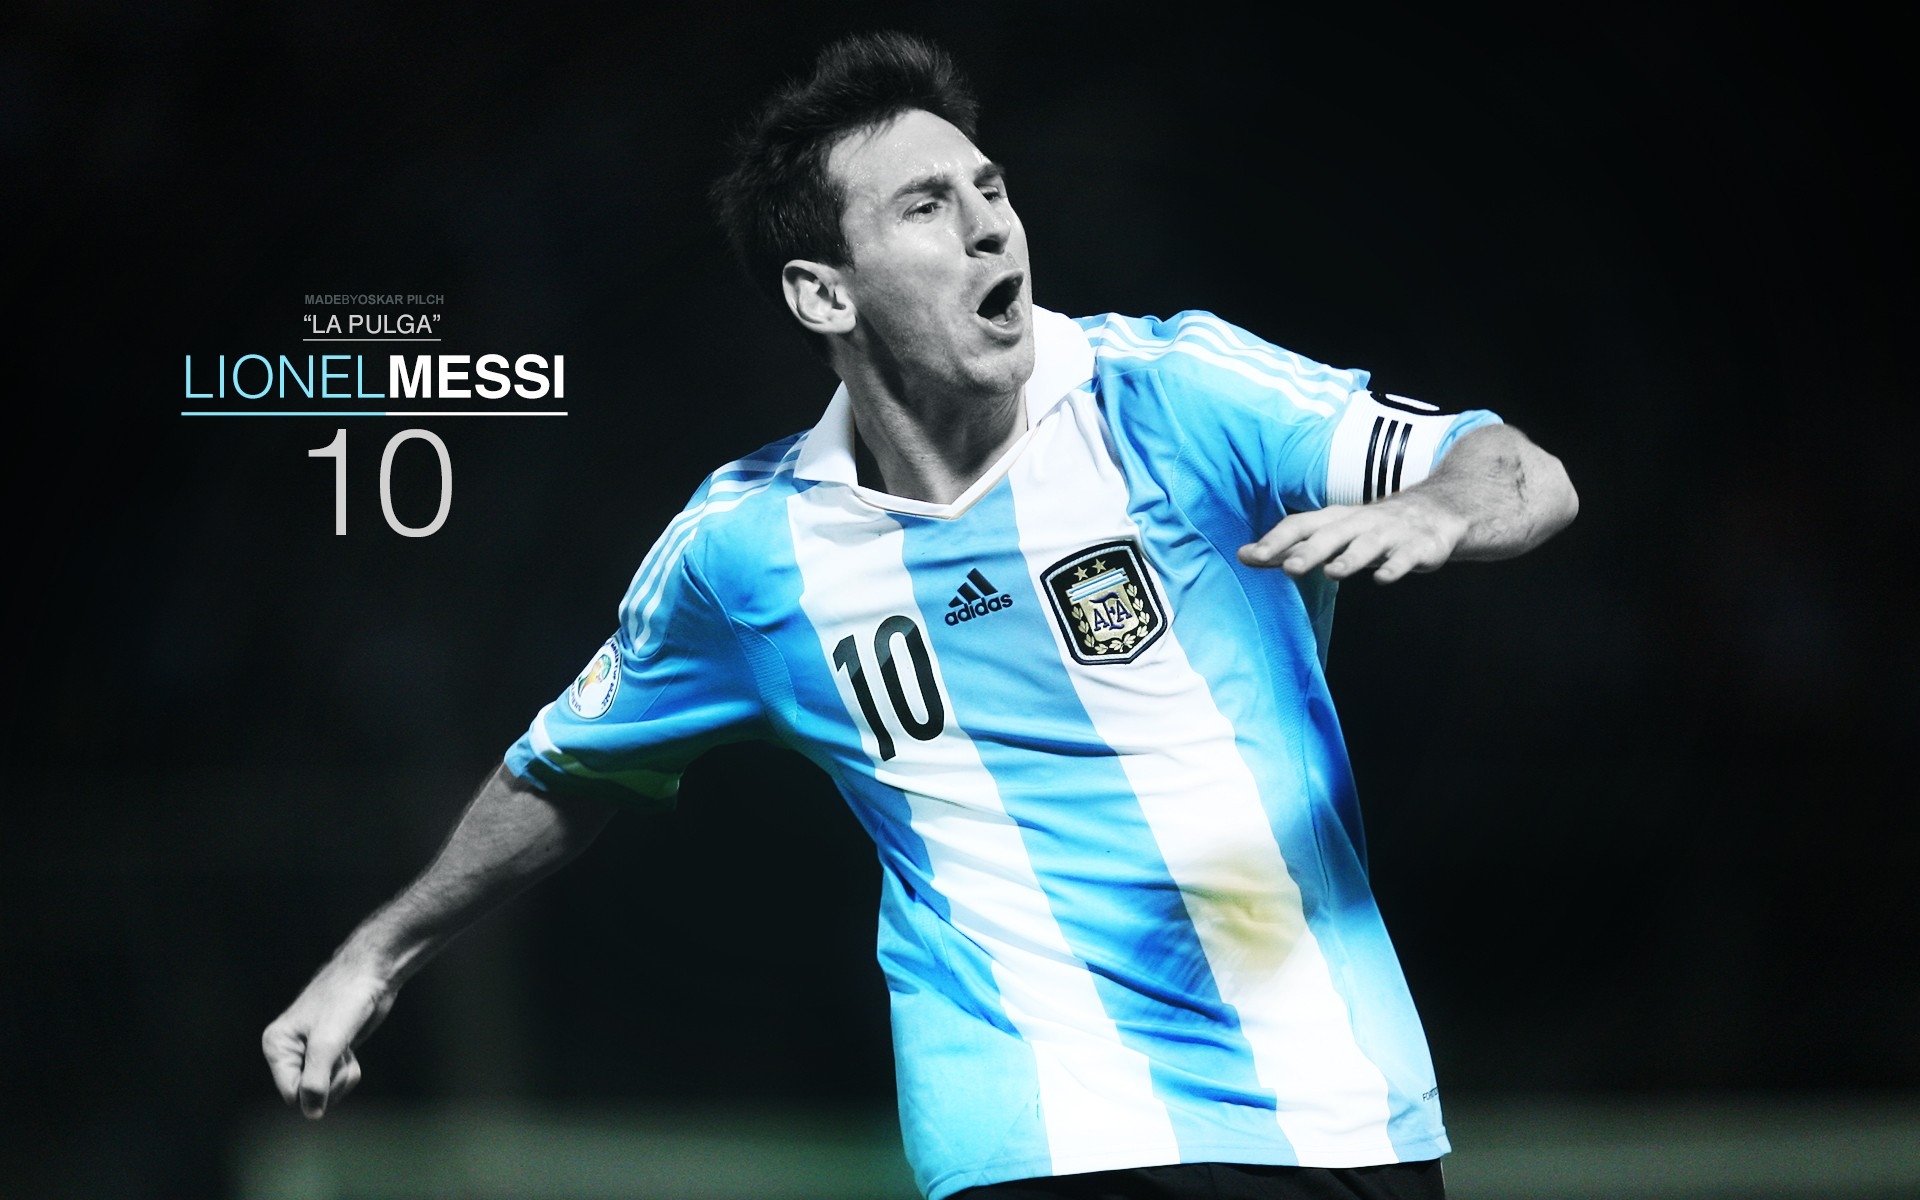 Wallpaper of Lionel Messi in a striped shirt